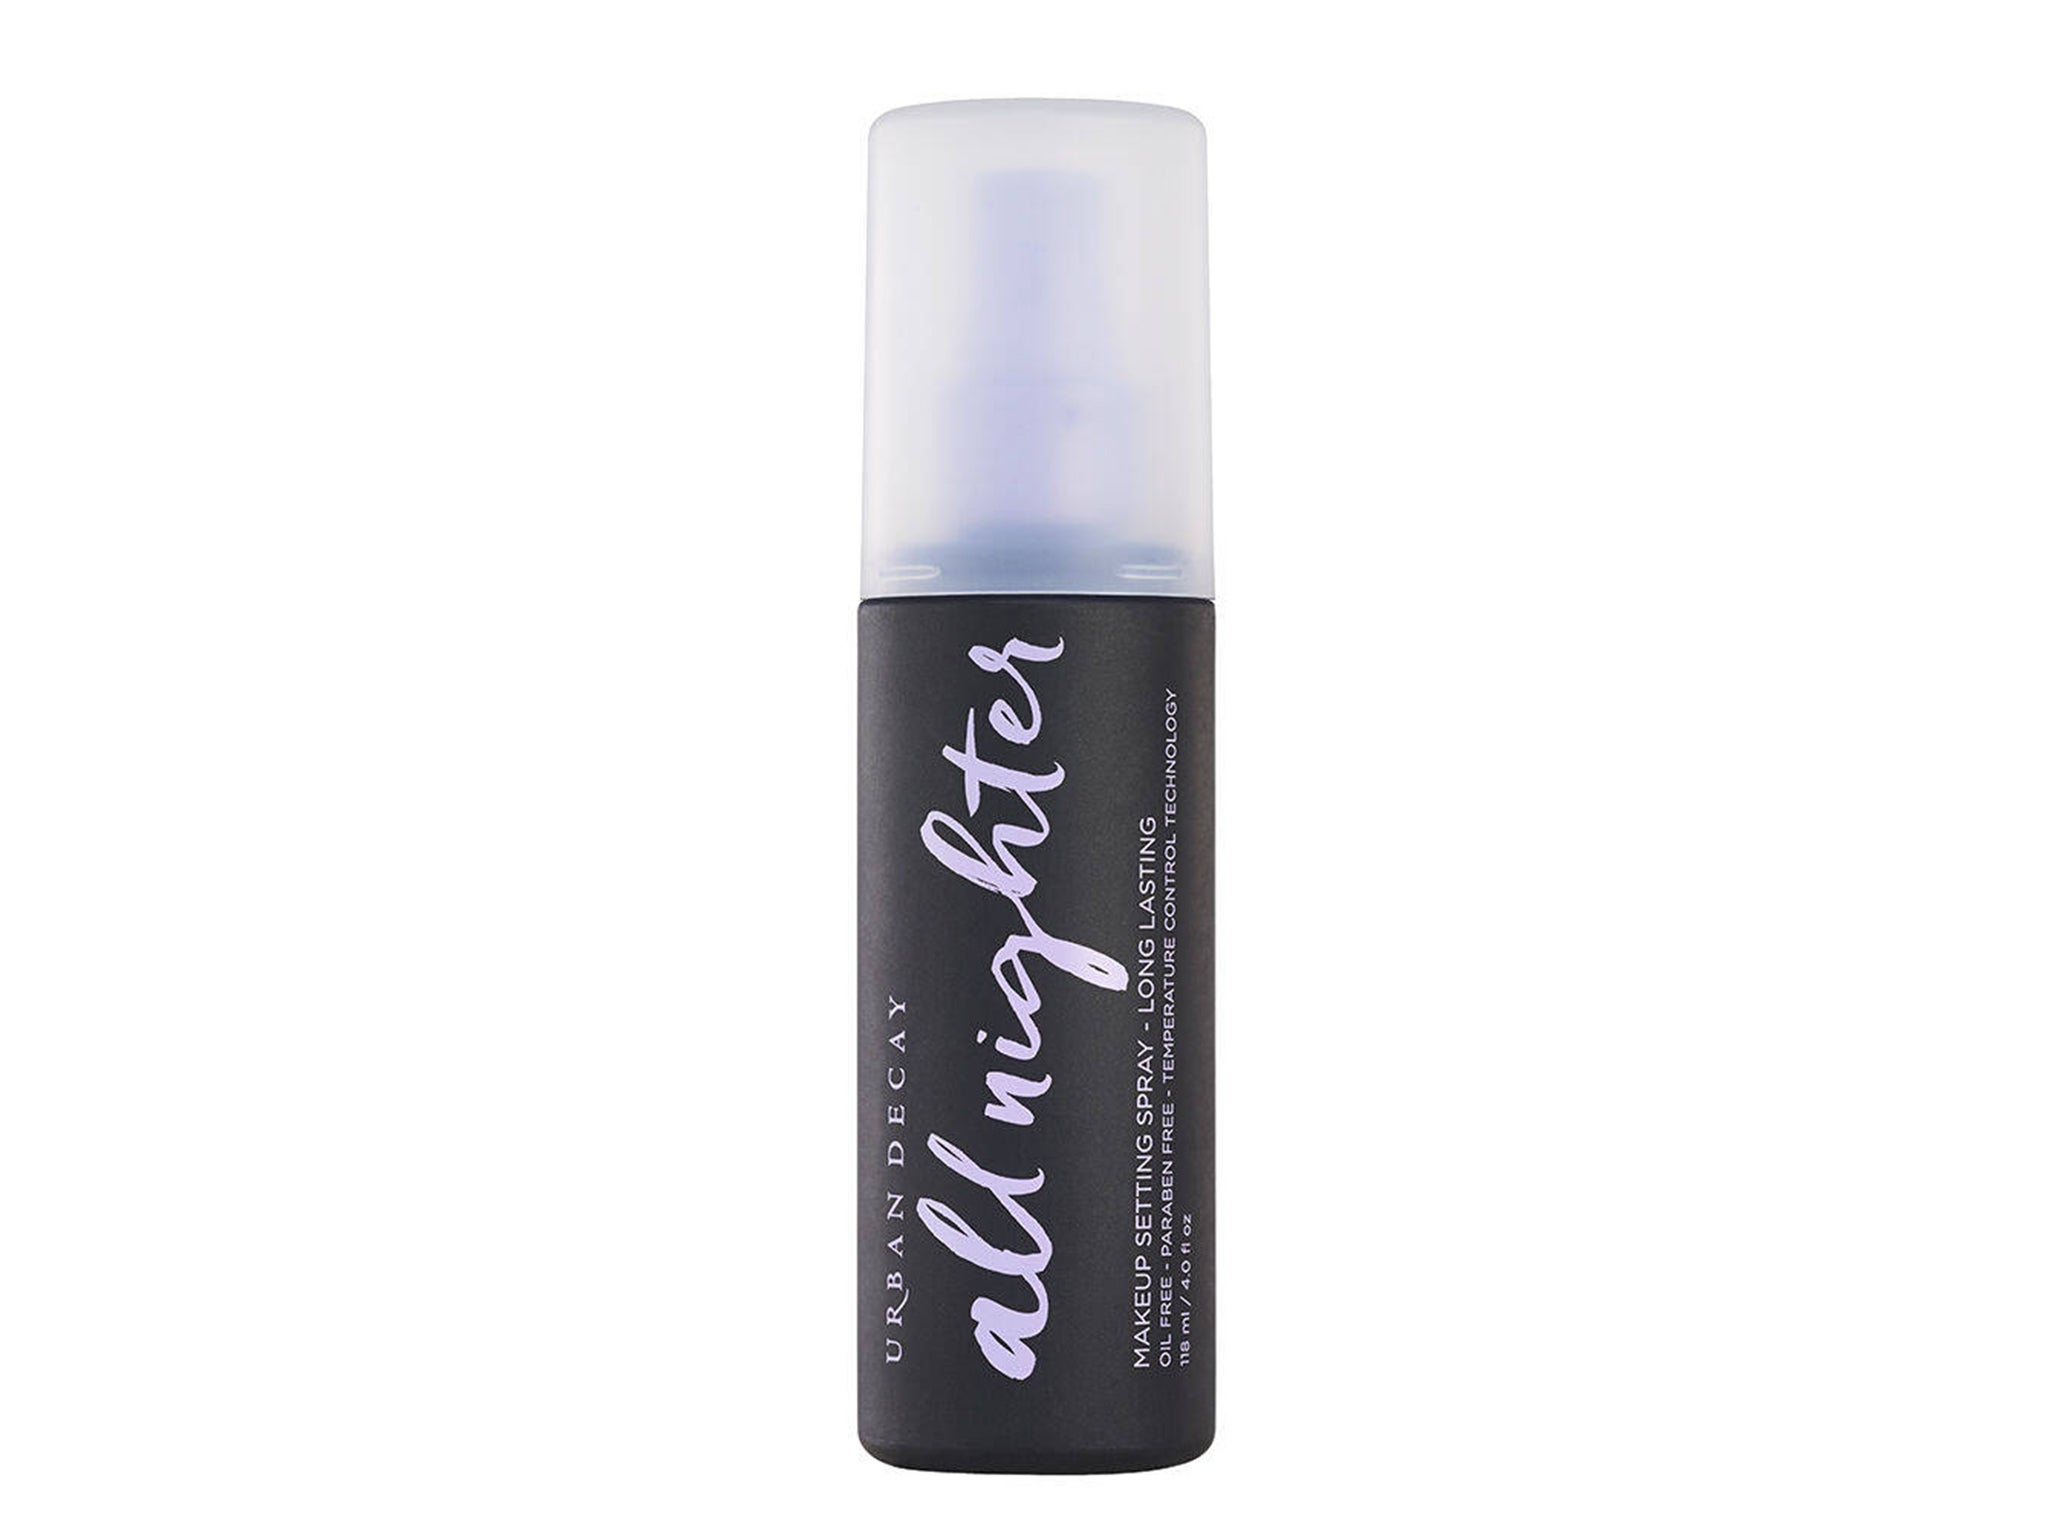 A quick spritz of this setting spray will keep your makeup in place all-day